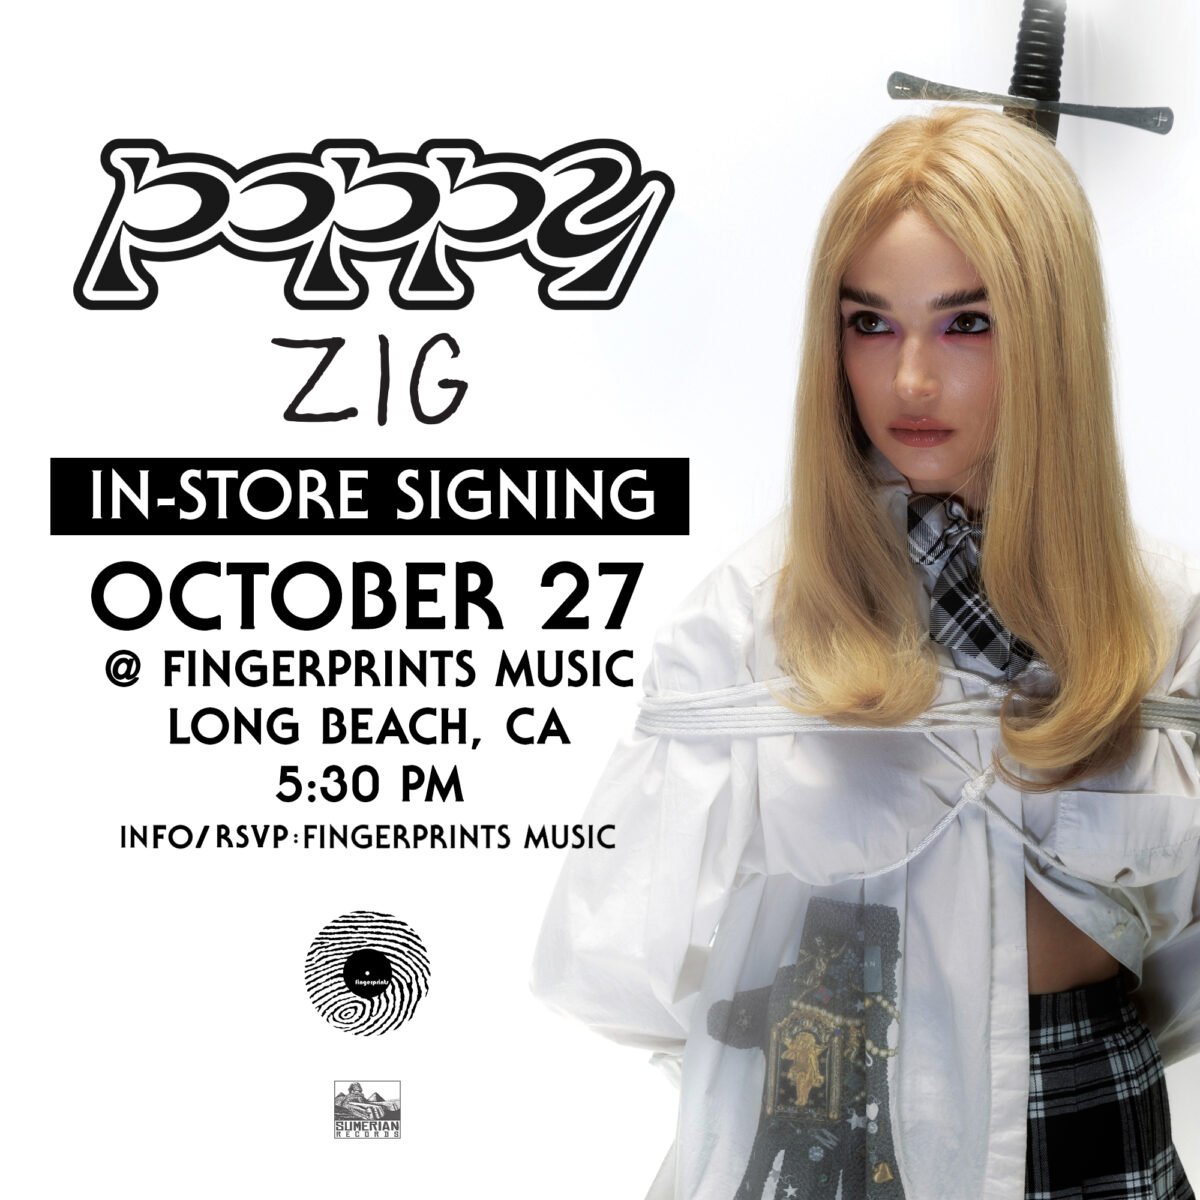 Poppy Signing ZIG at Fingerprints on release day 10/27 at 5:30pm